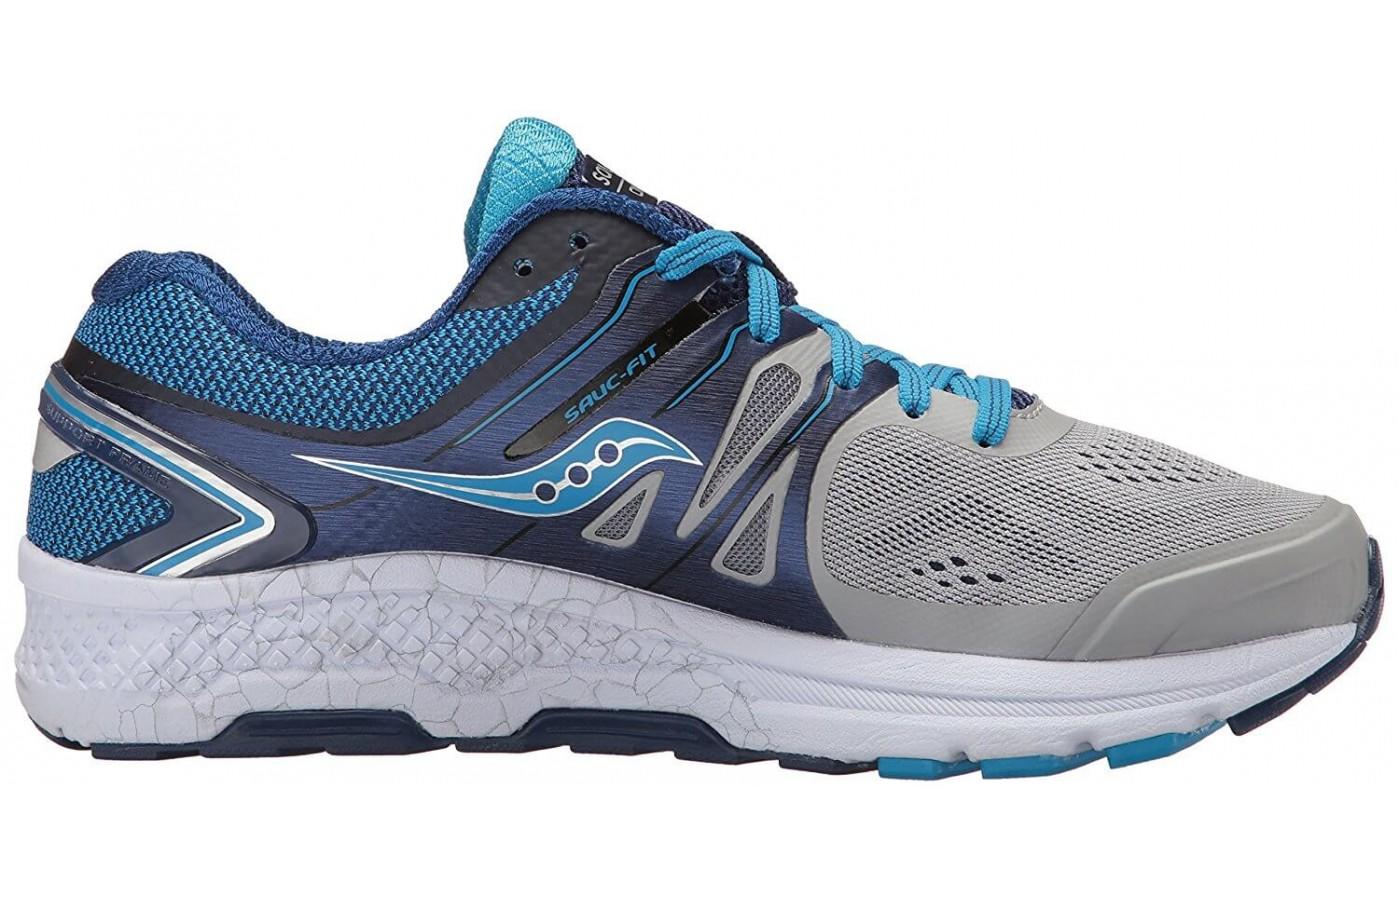 Runner love the stability features and arch support. 